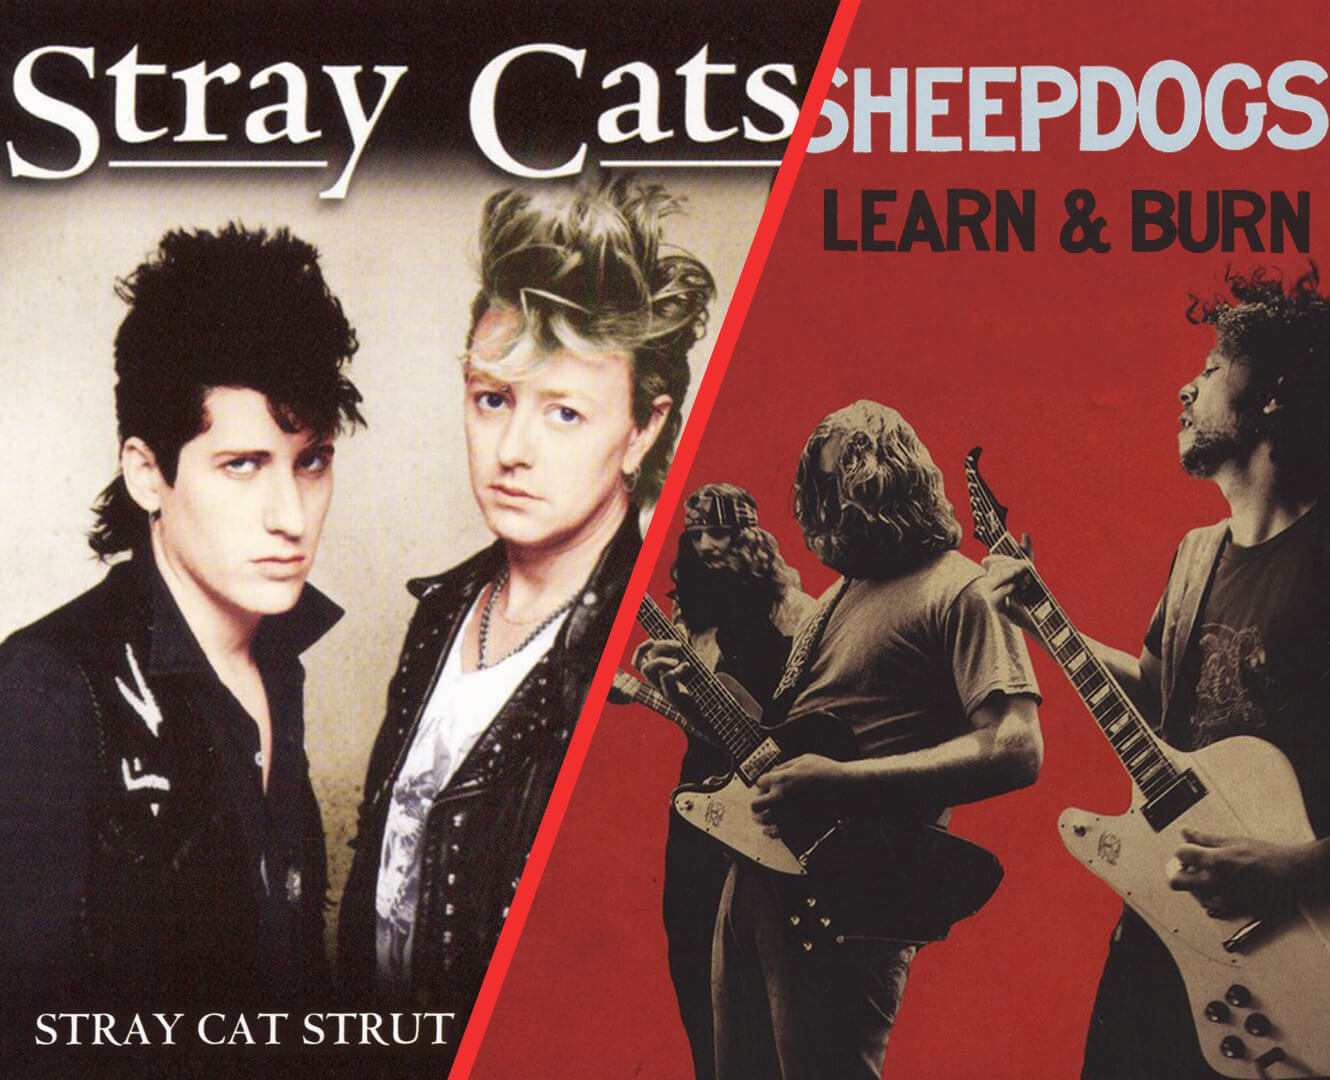 STRAY CATS AND SHEEPDOGS GRAPHIC